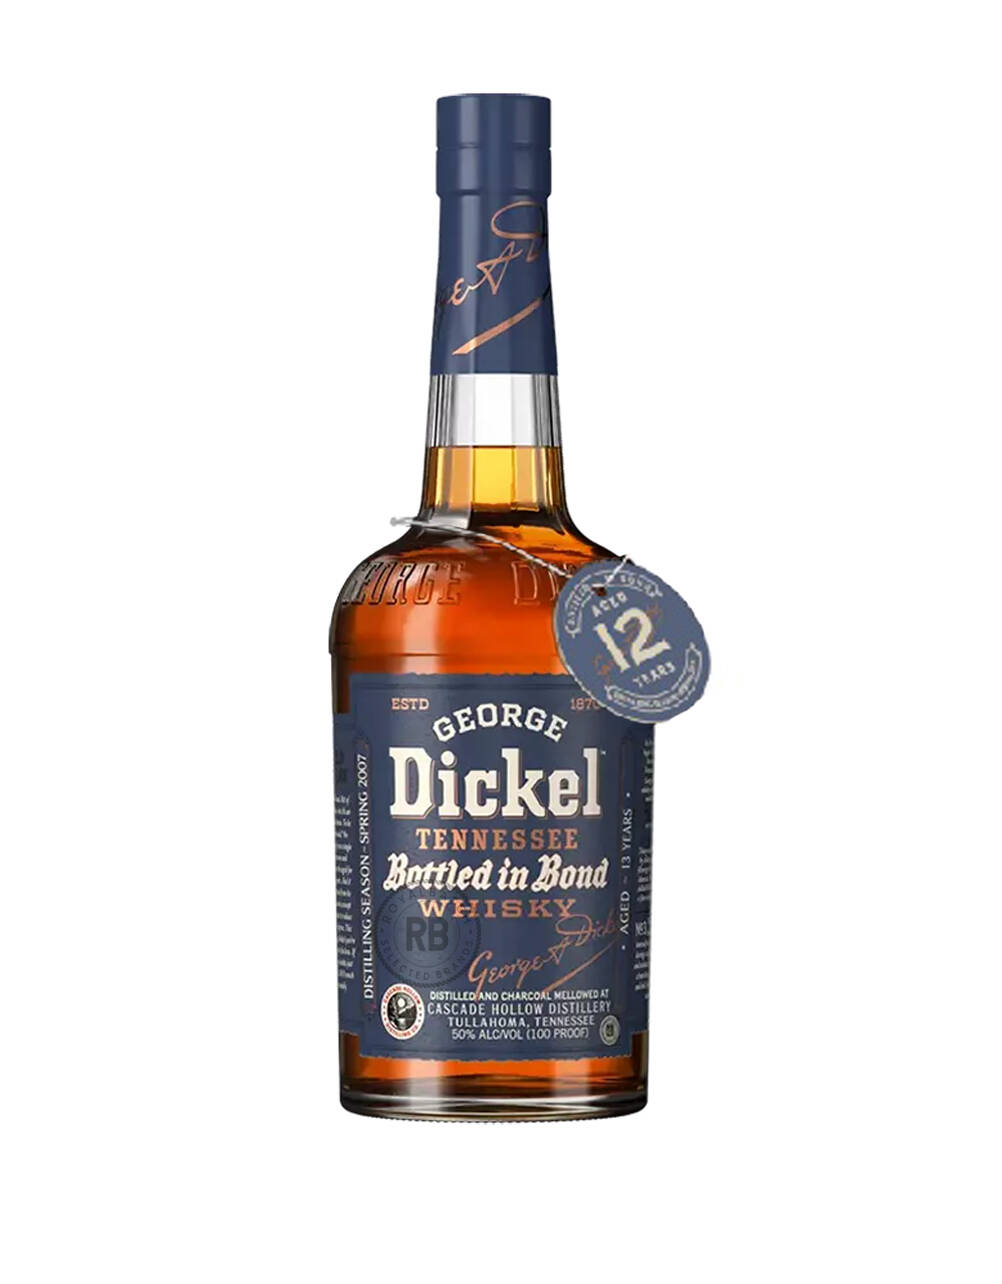 George Dickel Bottled in Bond 12 Year Old Whisky